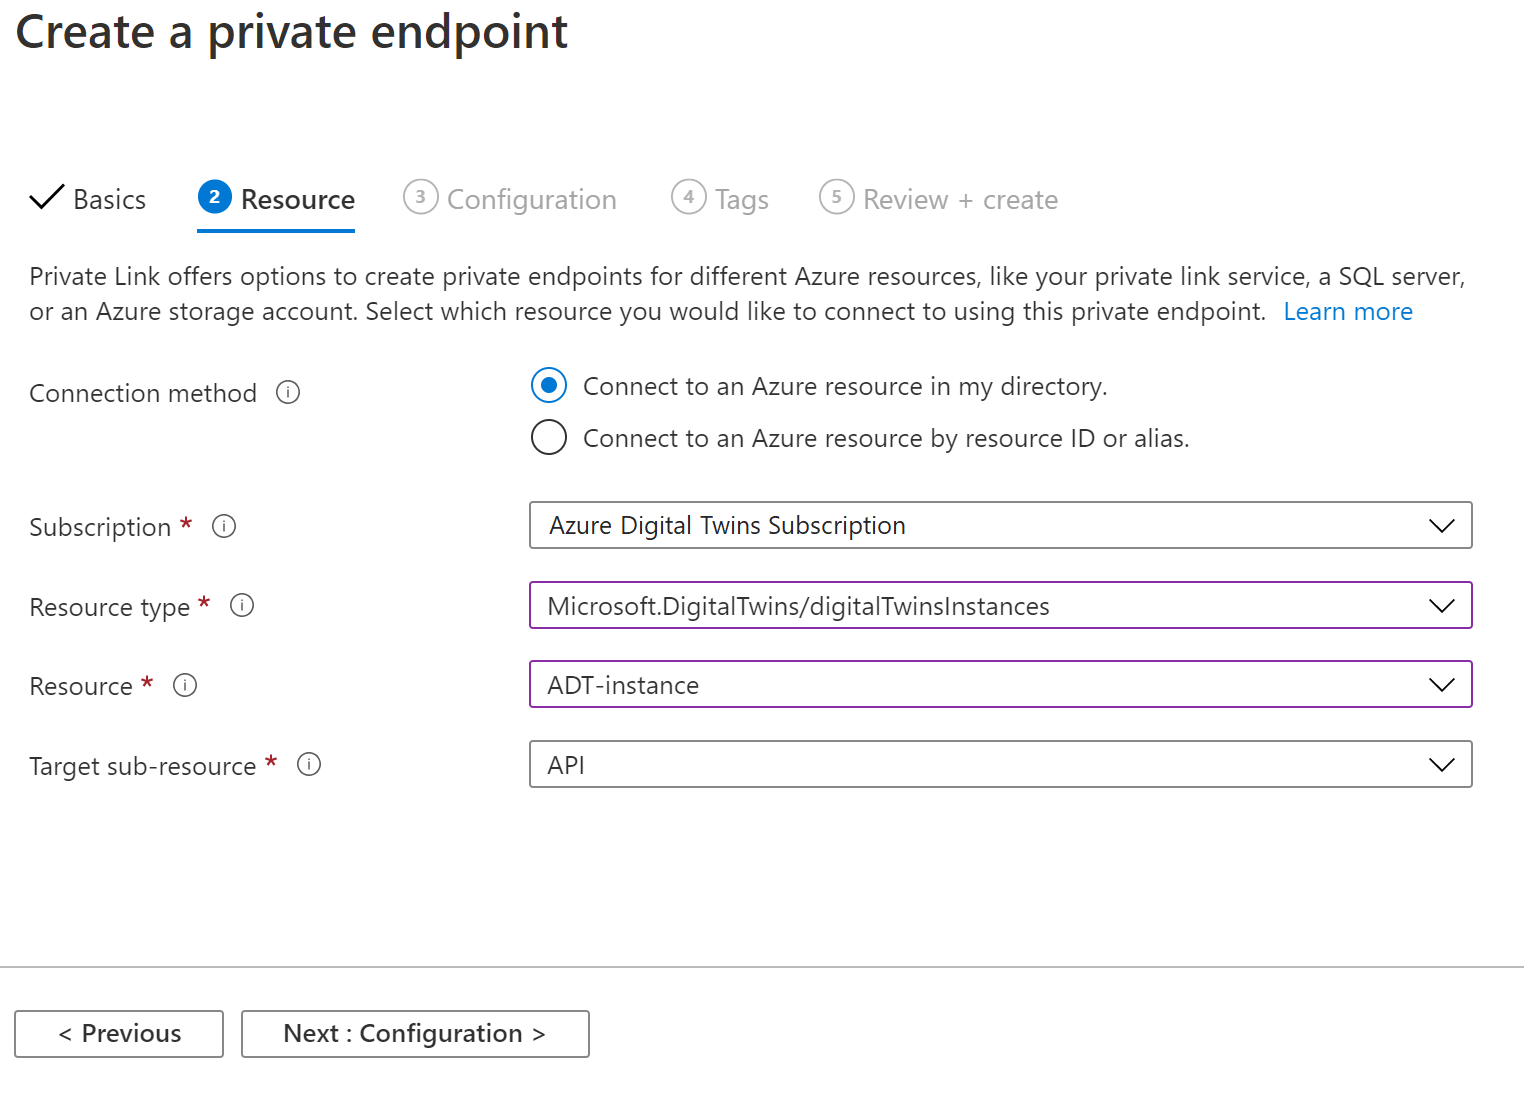 Screenshot of the Azure portal showing the second (Resource) tab of the Create a private endpoint dialog. It contains the fields described above.